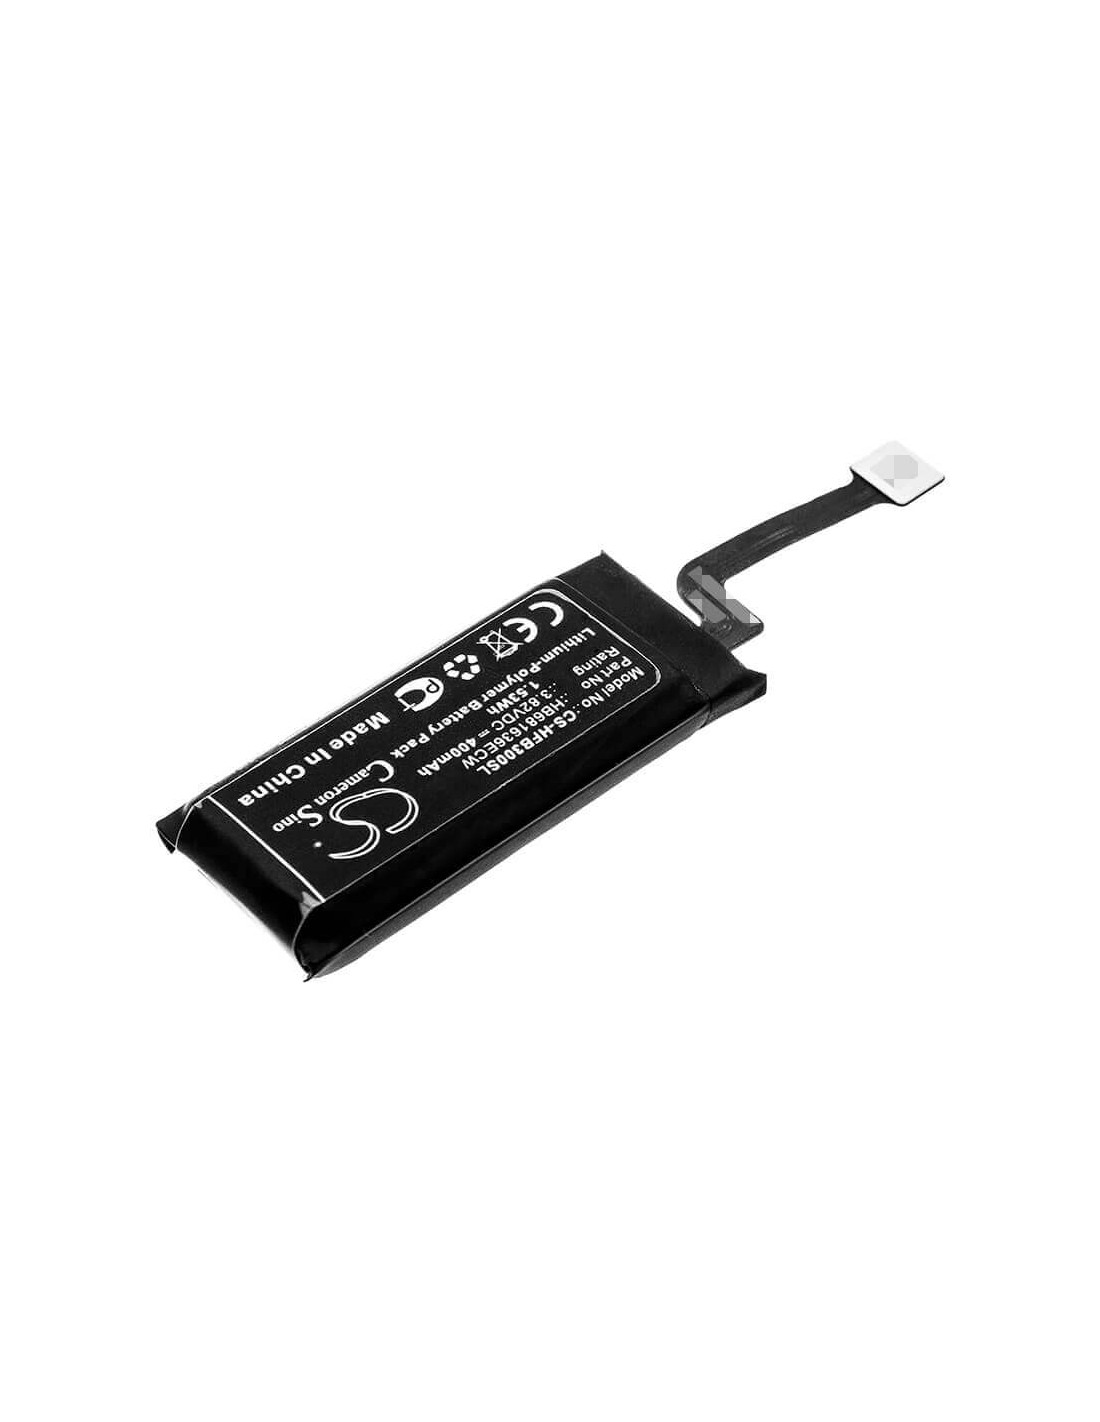 Battery for Huawei, Freebuds 3 3.82V, 400mAh - 1.53Wh